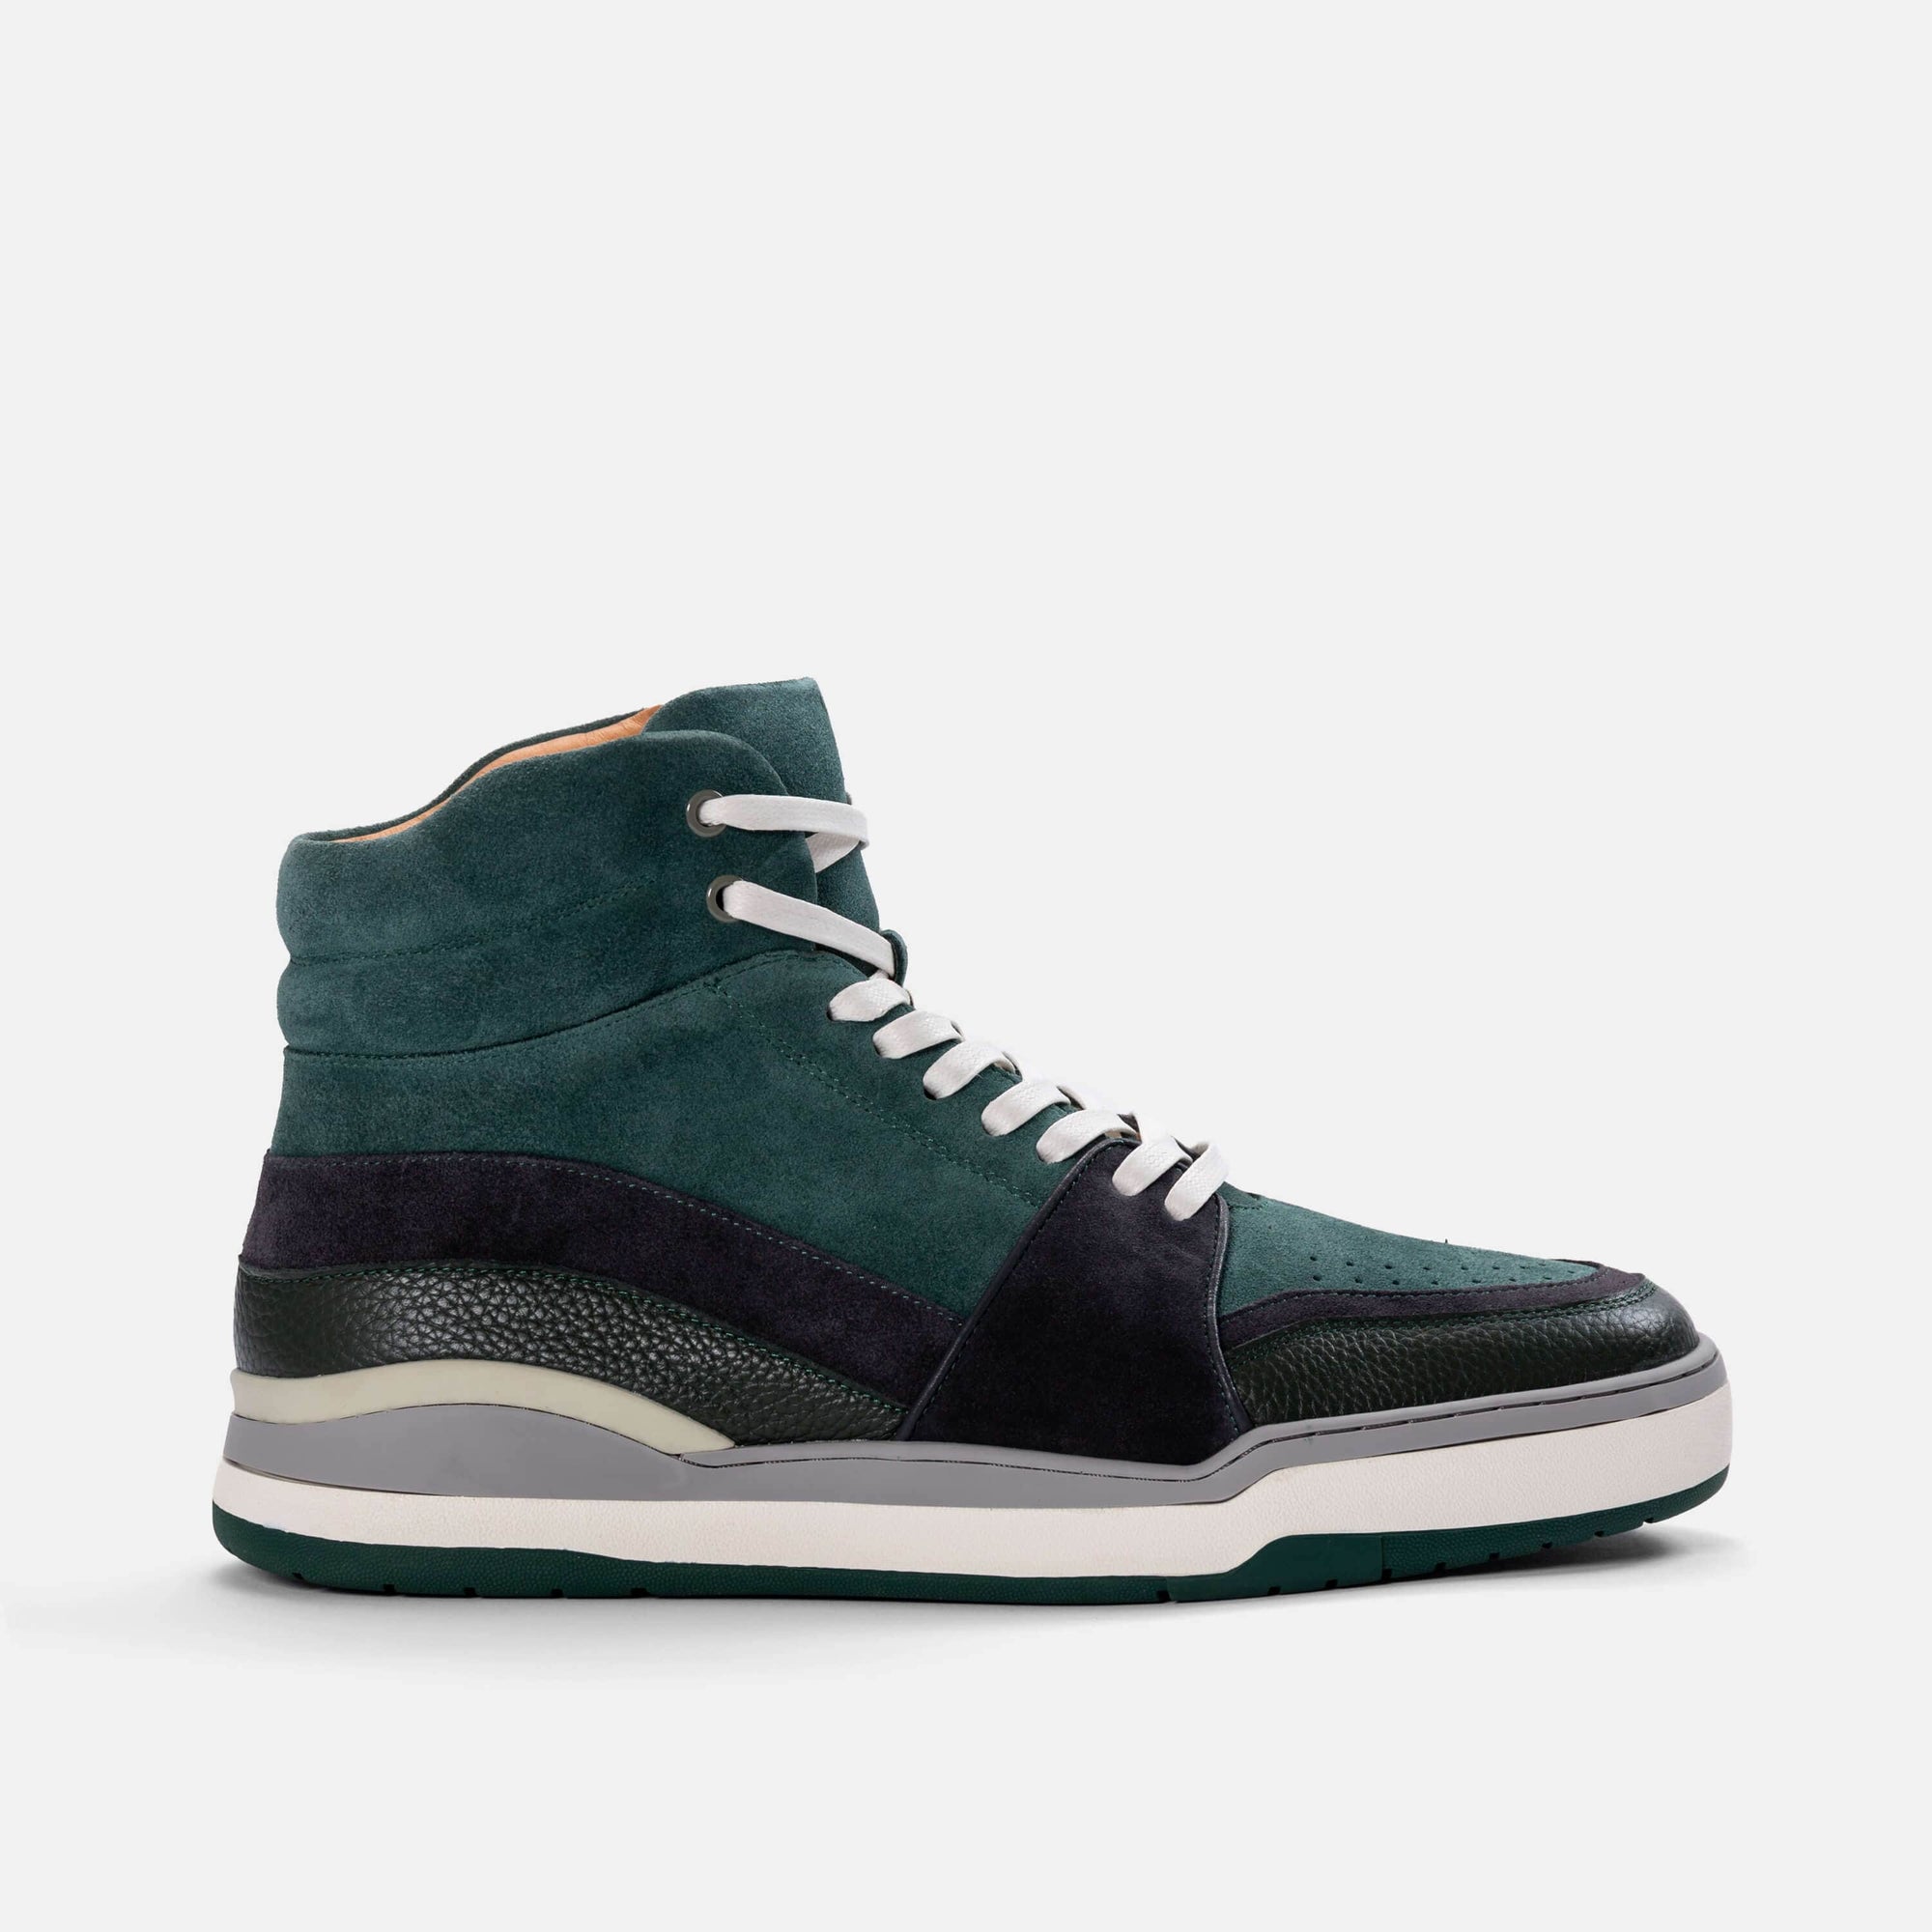 Poseidon Emerald Green Suede High Top Sneakers - Leather - Size: 14 by Marc Nolan